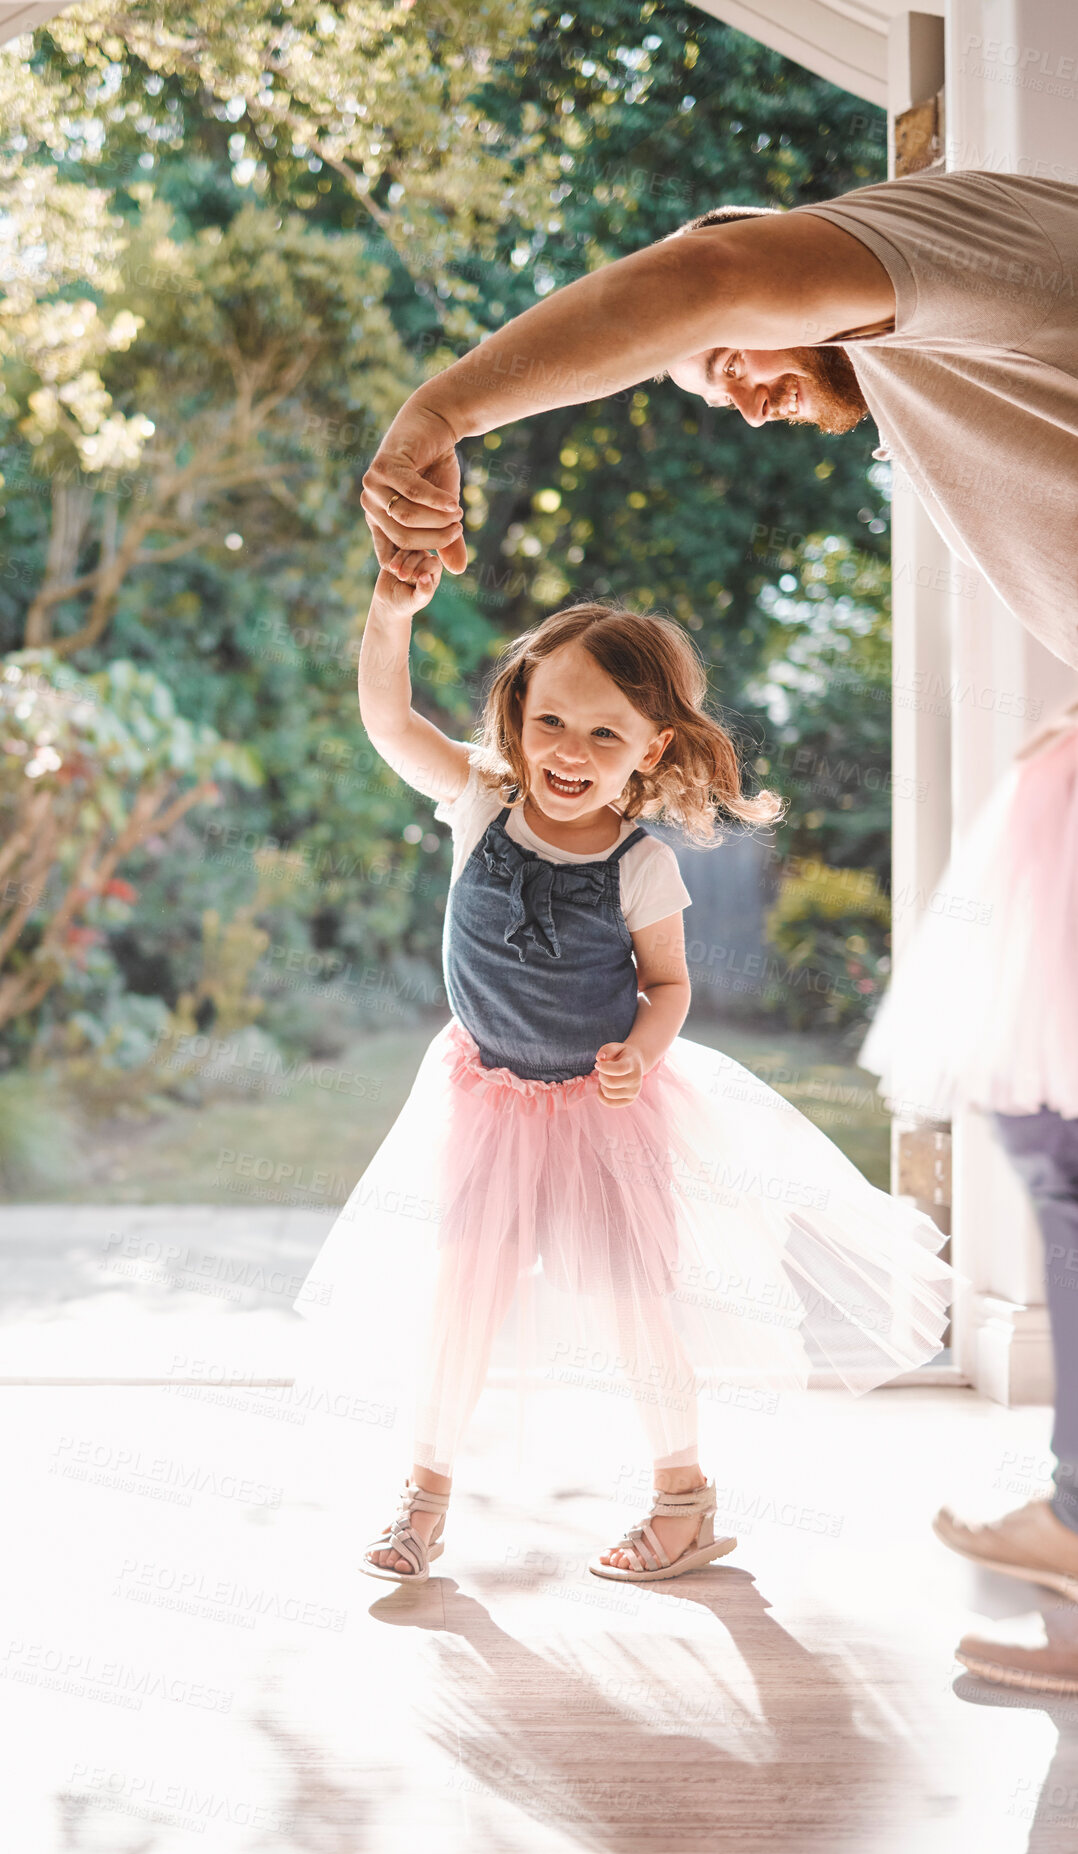 Buy stock photo Shot of an adorable young girl and her father dancing together at home